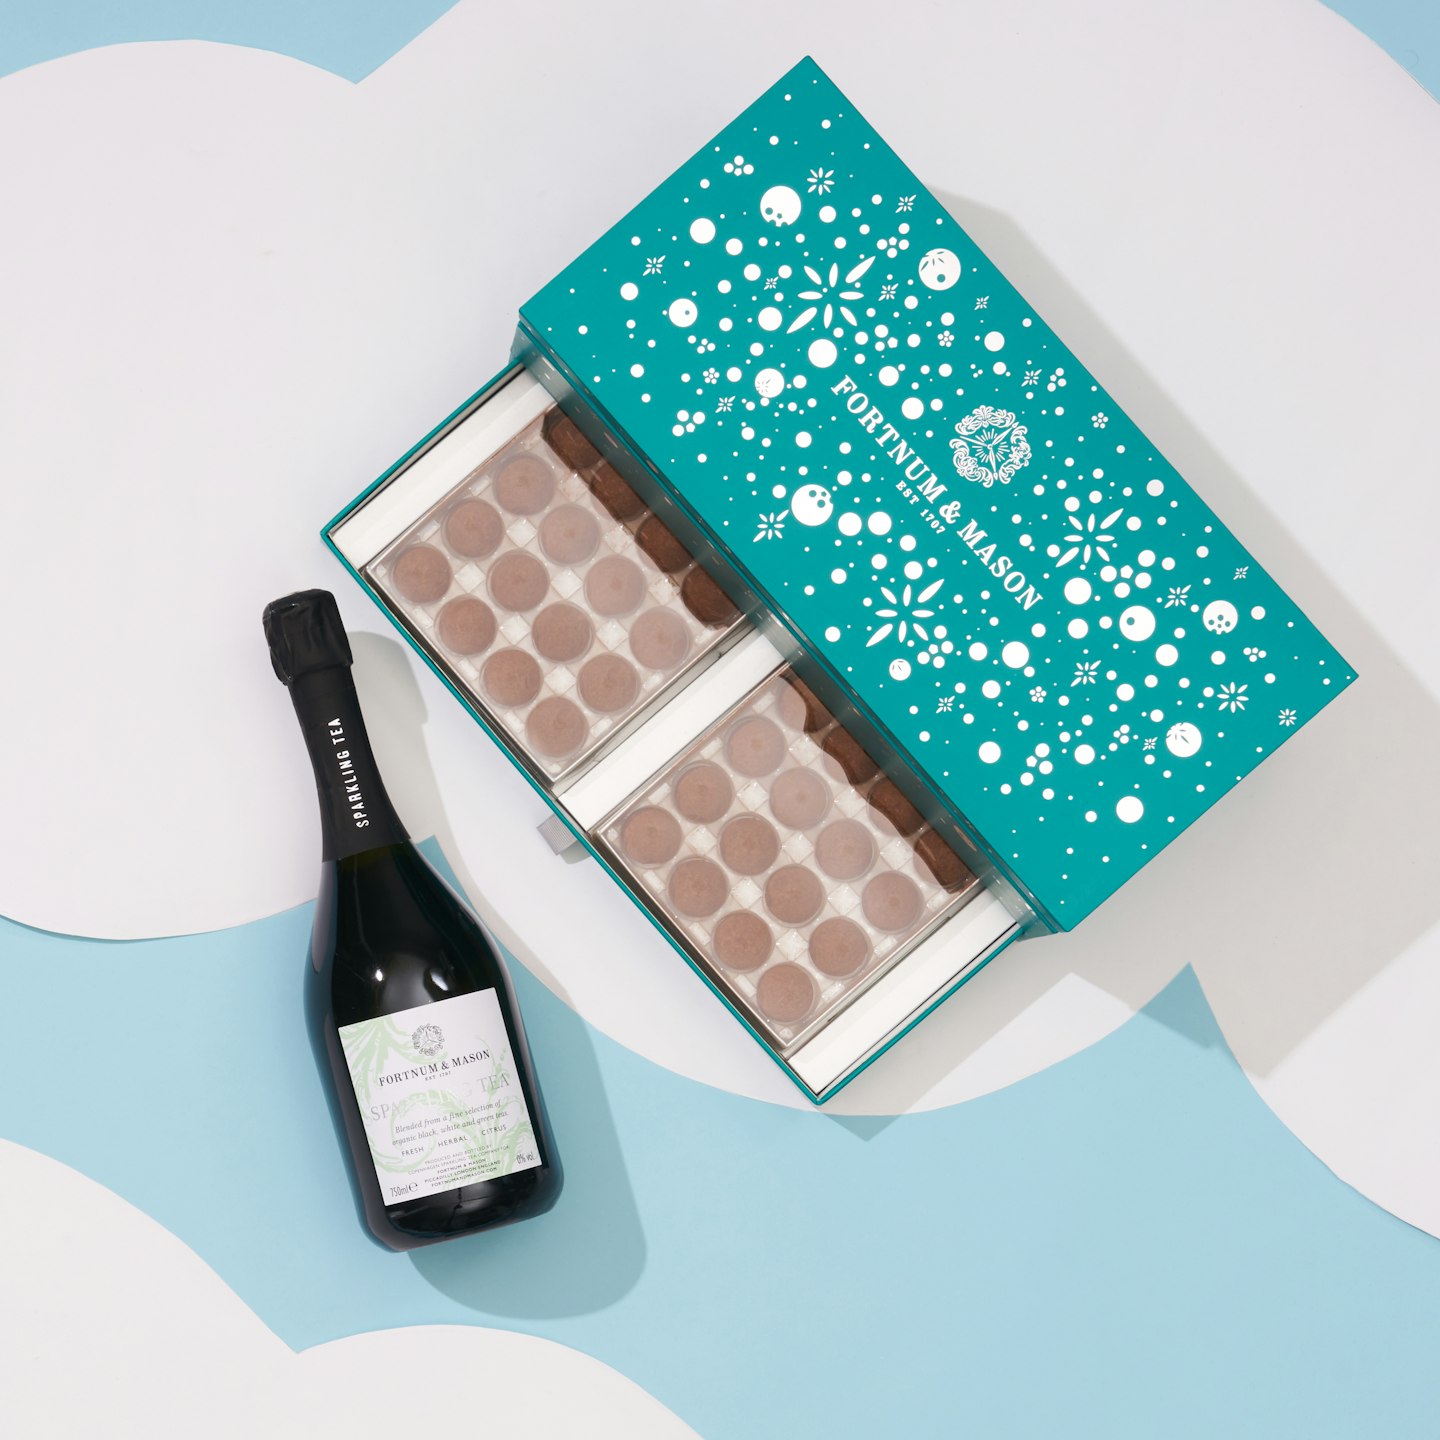 mum to be gifts  New Mum And Baby Gift Guide The Sparkling Tea & Truffle Gift Box, Fortnum & Mason